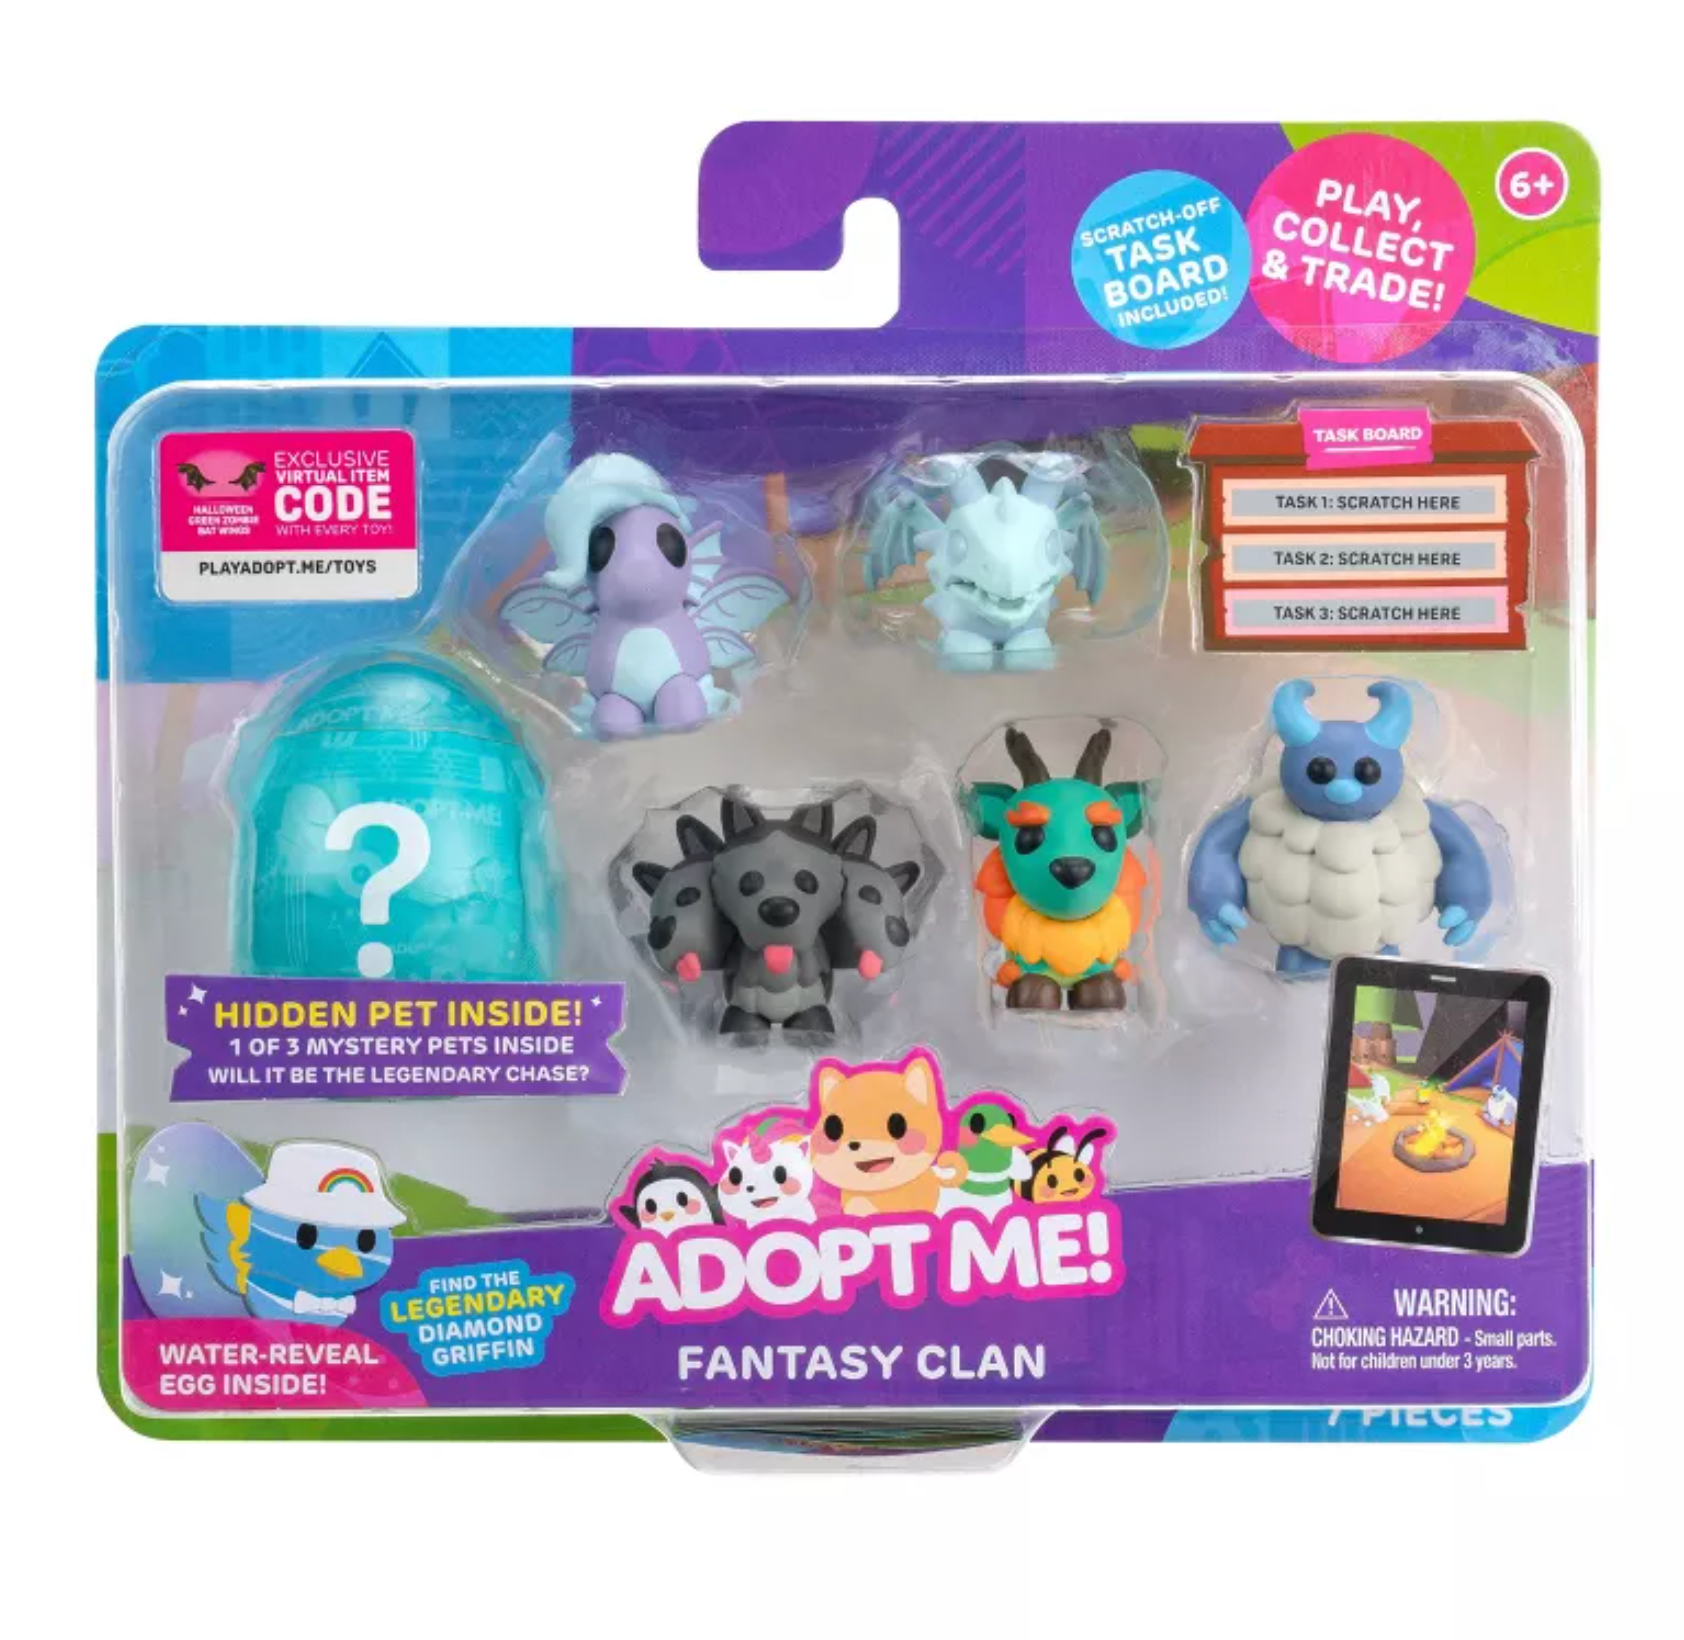 Adopt me (free pets) team wyc and Marco]